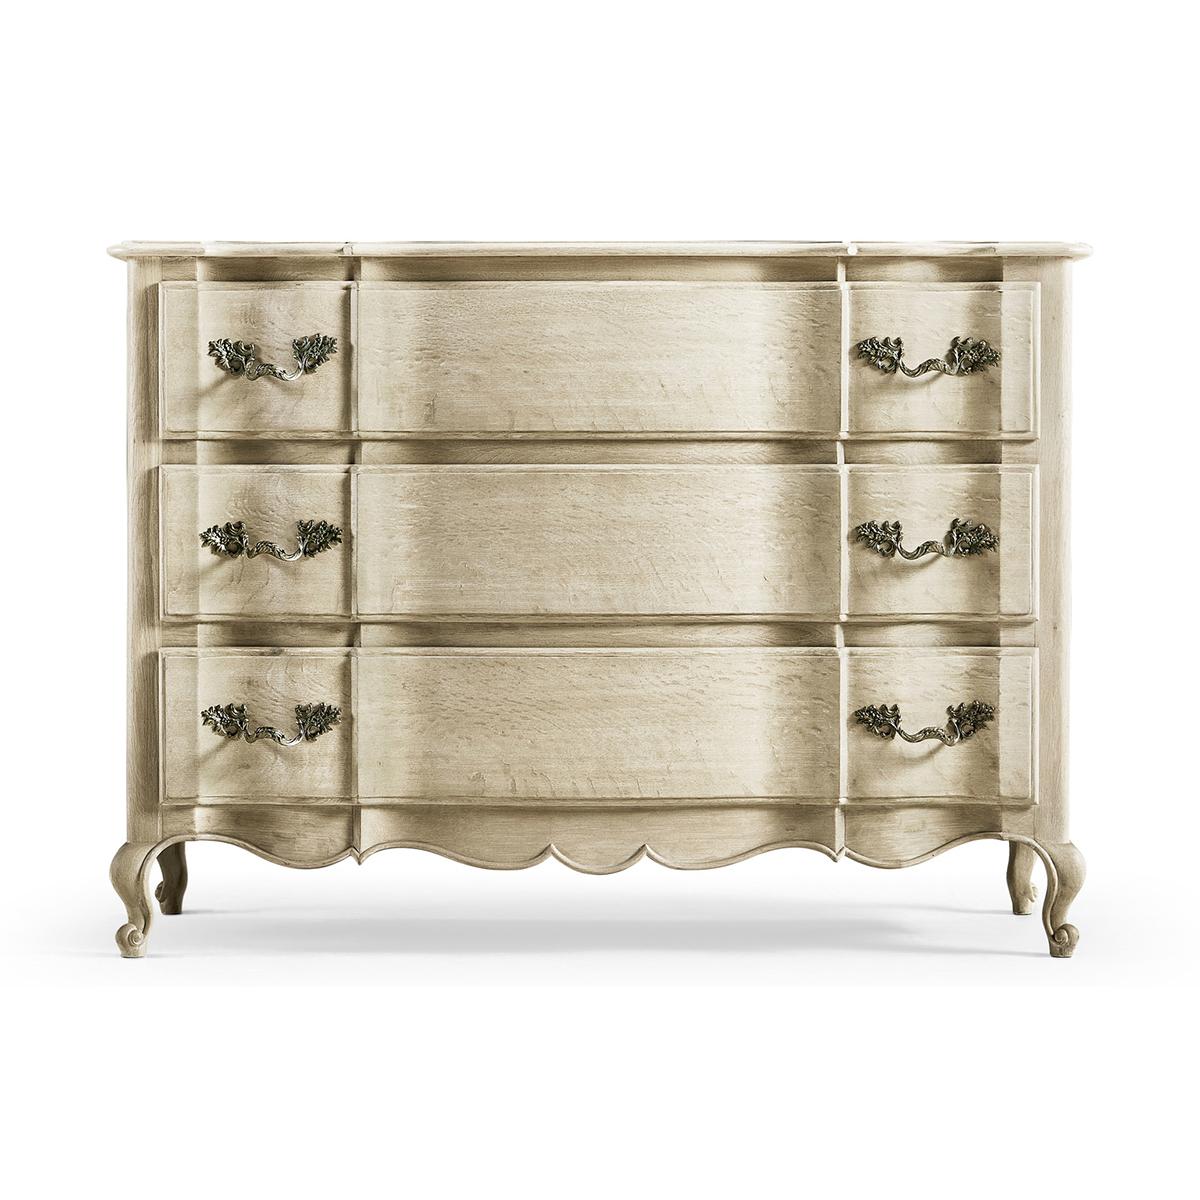 French Provincial Oak Commode, a solid stripped oak case featuring three serpentine front drawers and a hand-carved skirt on delicate cabriole legs.

Dimensions: 50